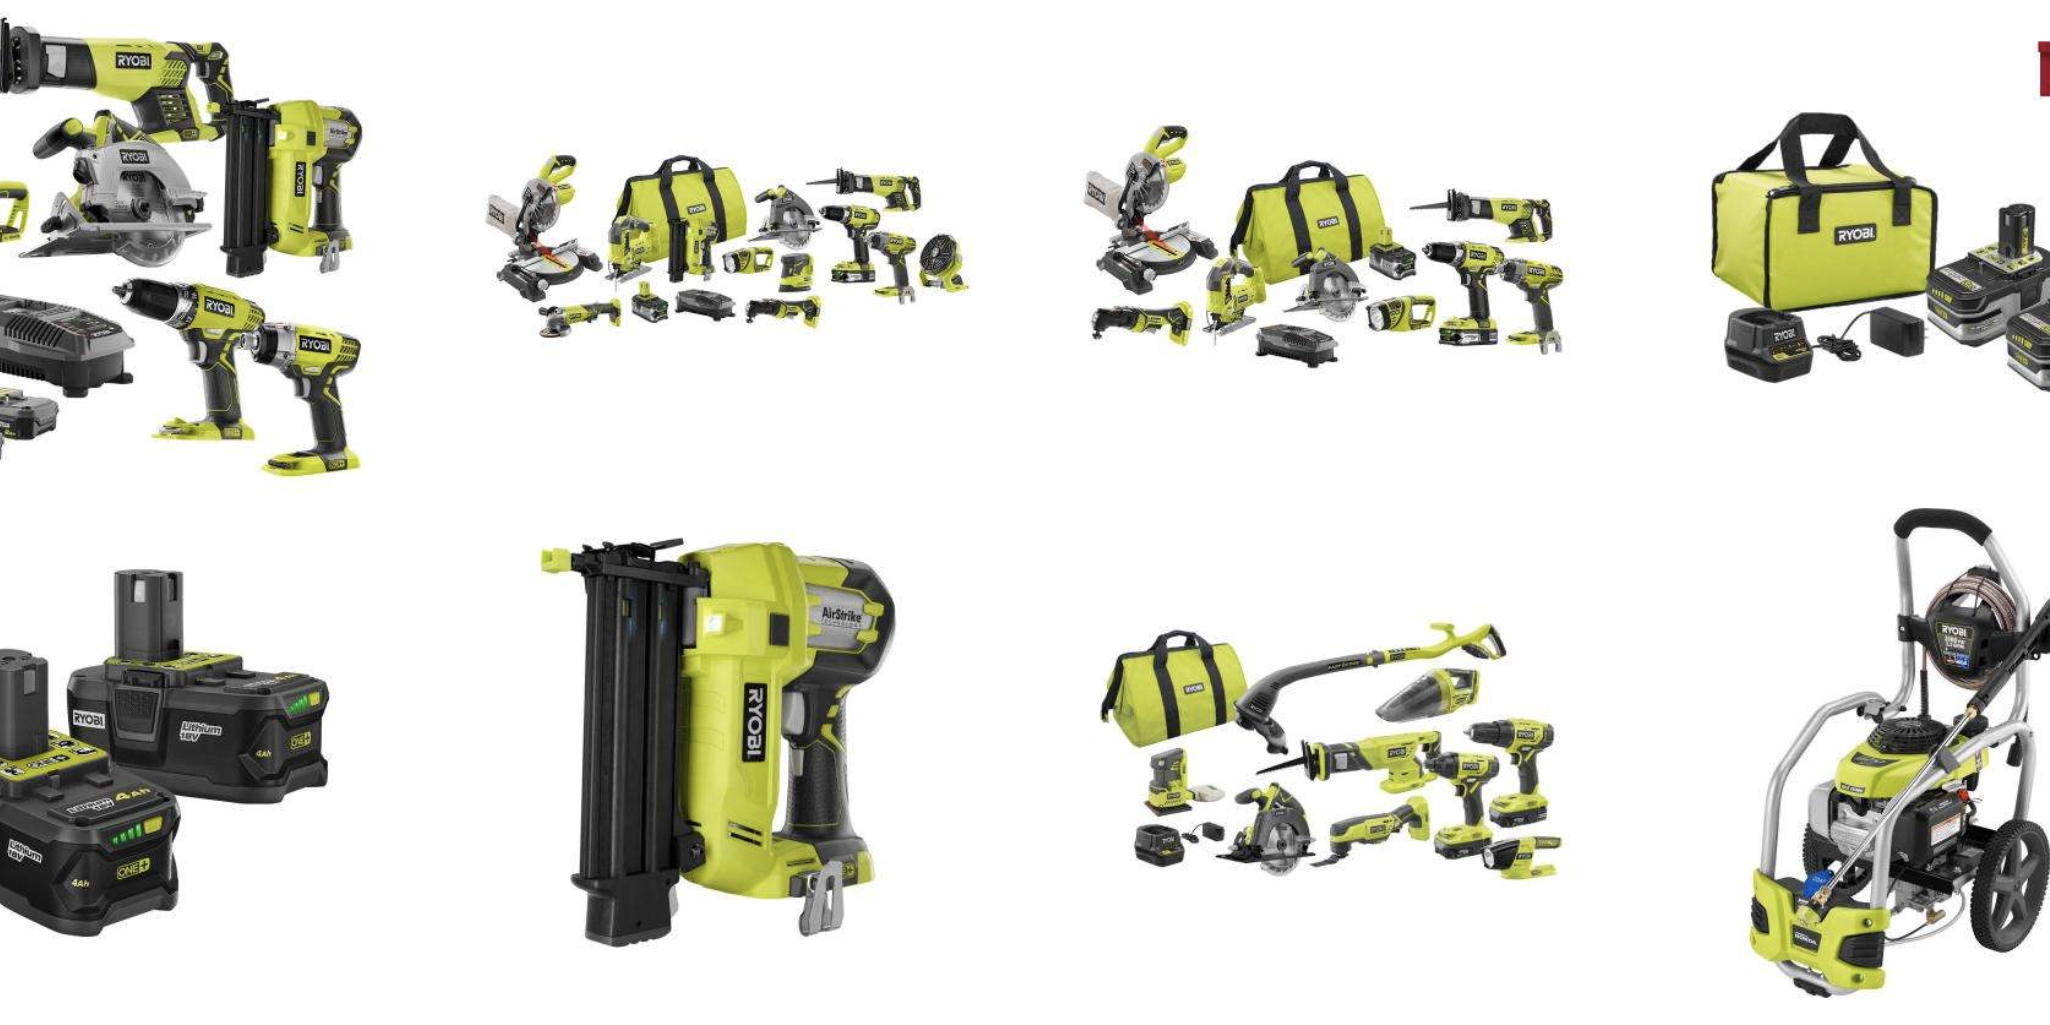 Ryobi Black Friday tool sale at Home Depot takes up to 40% off, more - 9to5Toys